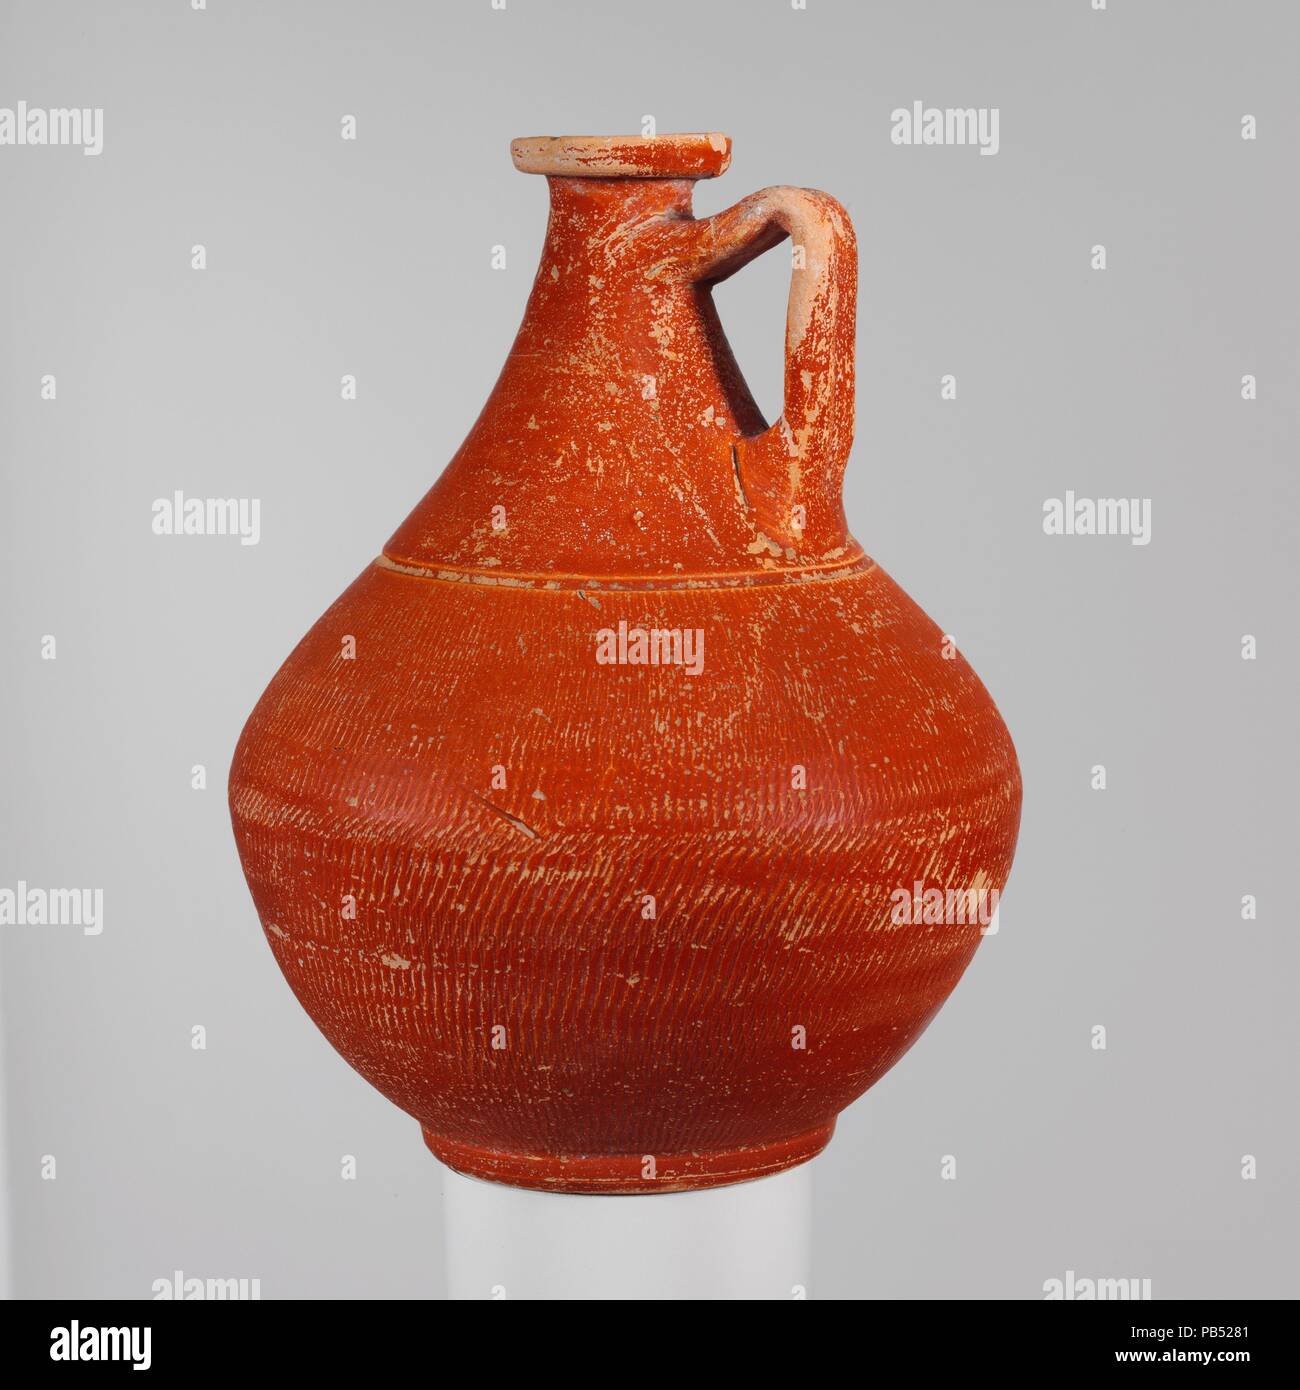 https://c8.alamy.com/comp/PB5281/terracotta-jug-culture-roman-dimensions-6-14in-158cm-date-2nd-half-of-the-1st-century-ad-red-glazed-jug-with-incised-body-and-one-handle-museum-metropolitan-museum-of-art-new-york-usa-PB5281.jpg